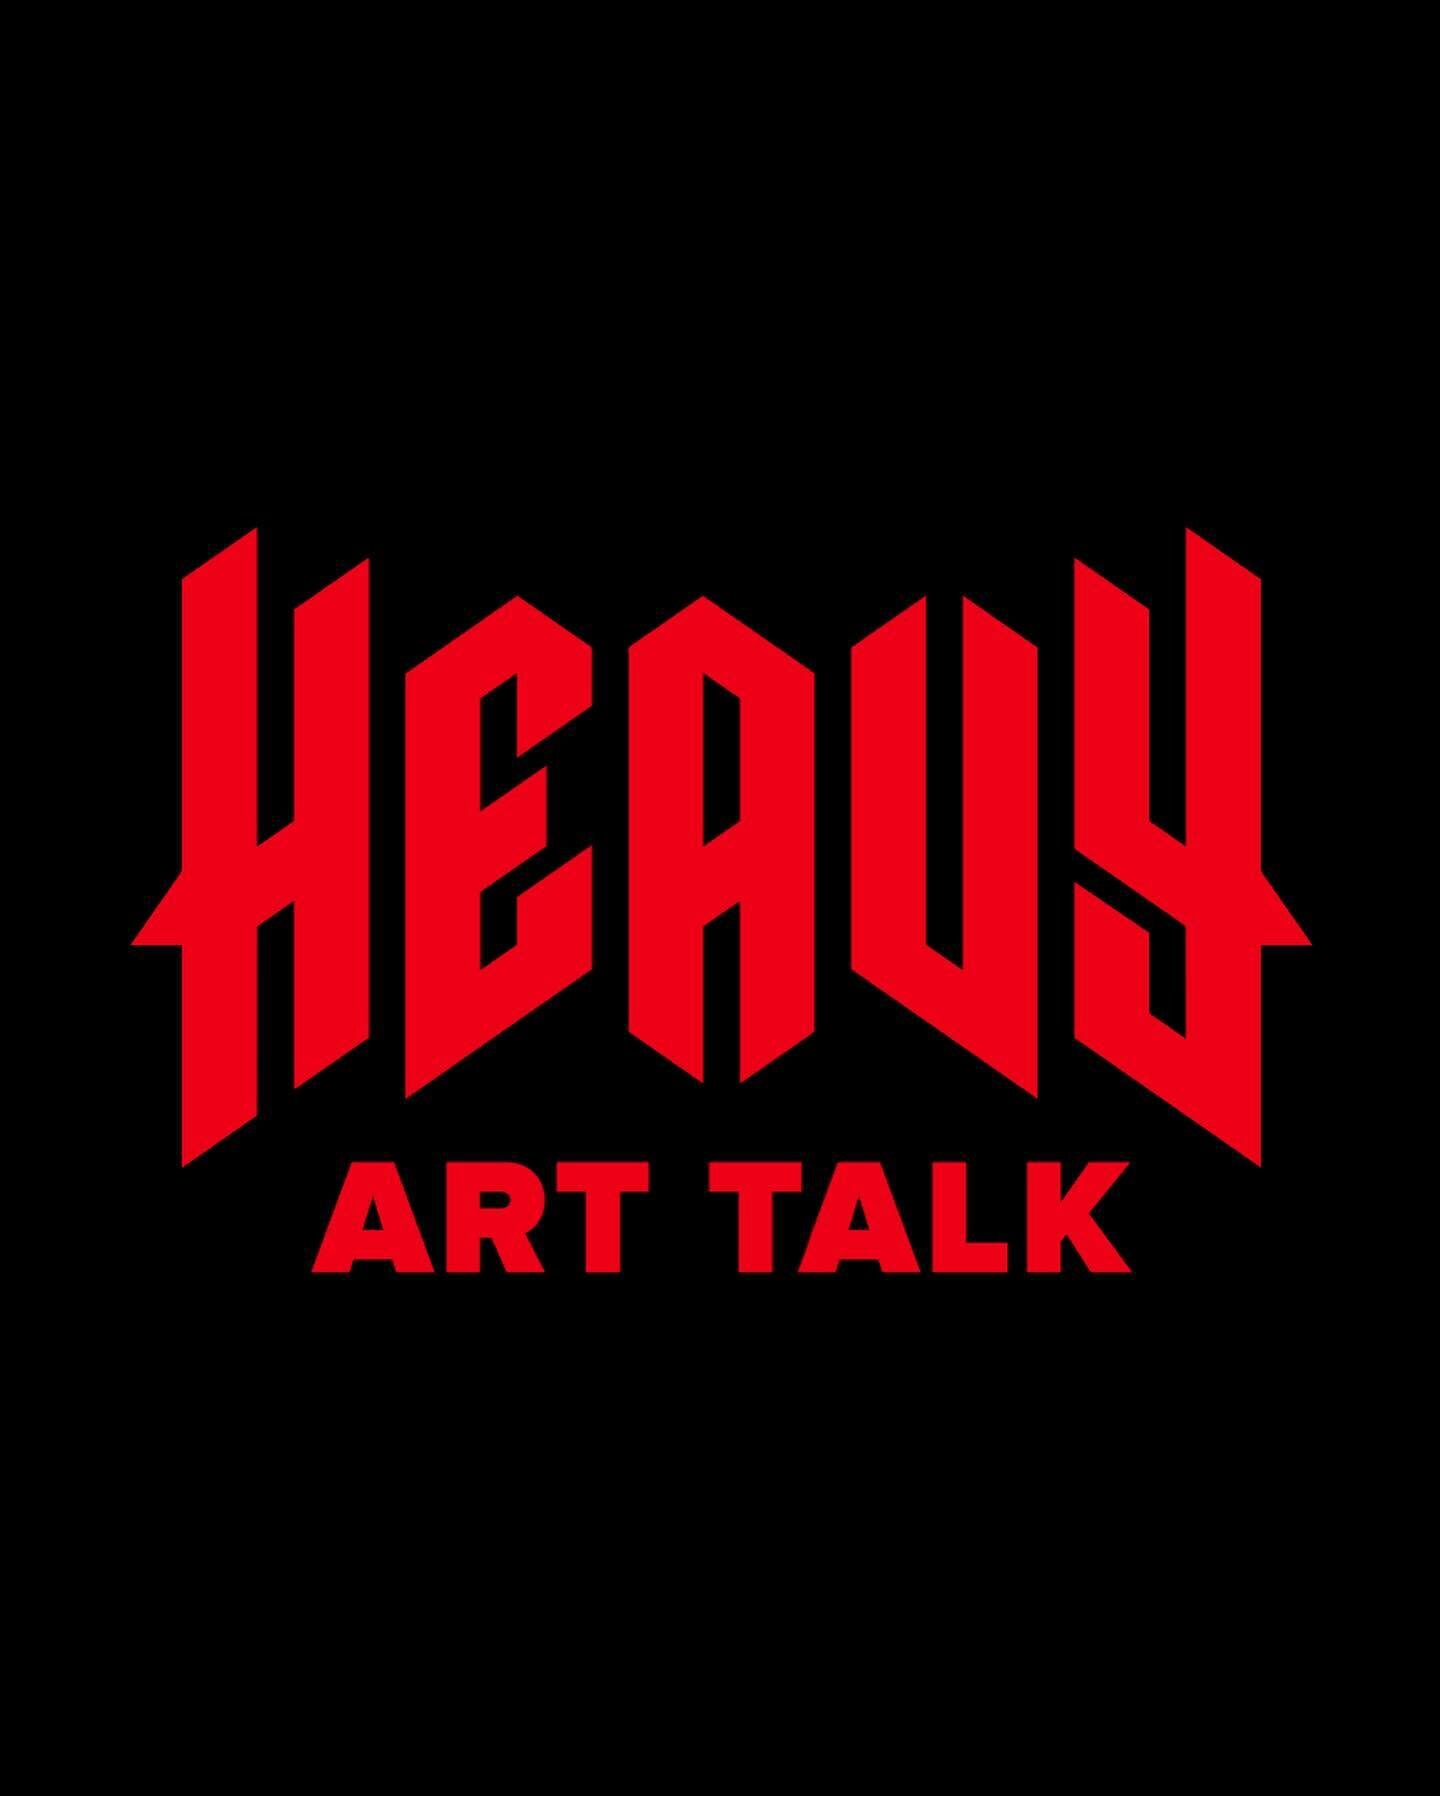 Heavy Art Talk - What&rsquo;s not to love here? Bringing artist together to talk through their passions around art and metal music. Big shout out to my good friend @literal__lee for kickstarting this awesome project, and I can&rsquo;t wait to see how